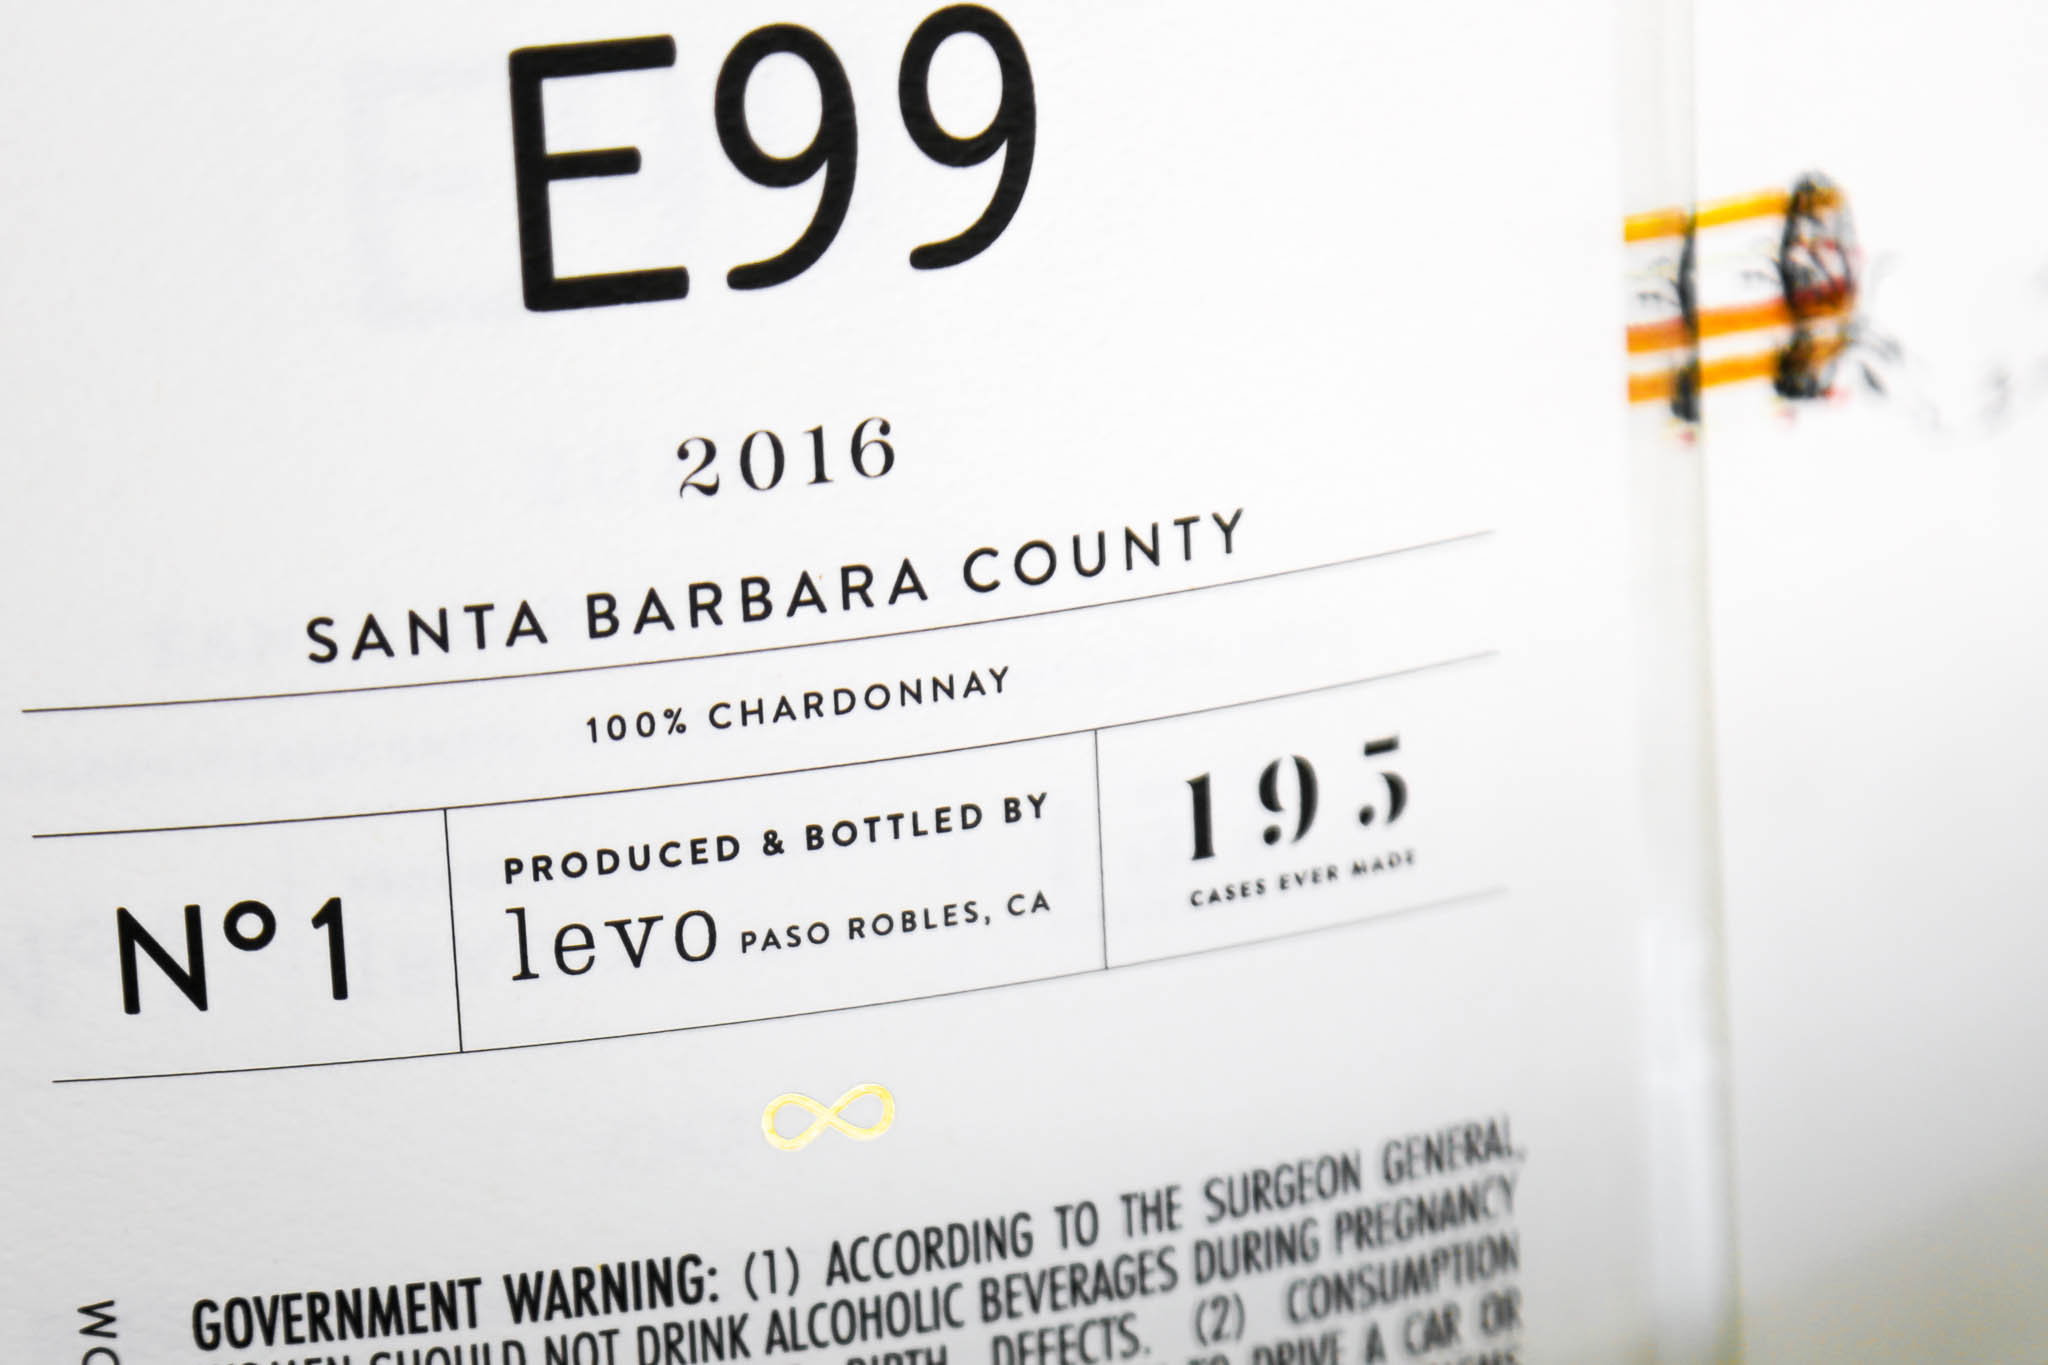 Close Up Detail Shot of Gold Foil for Levo Wine E99 Label by Paso Robles Wine Photographer Amarie Design Co.